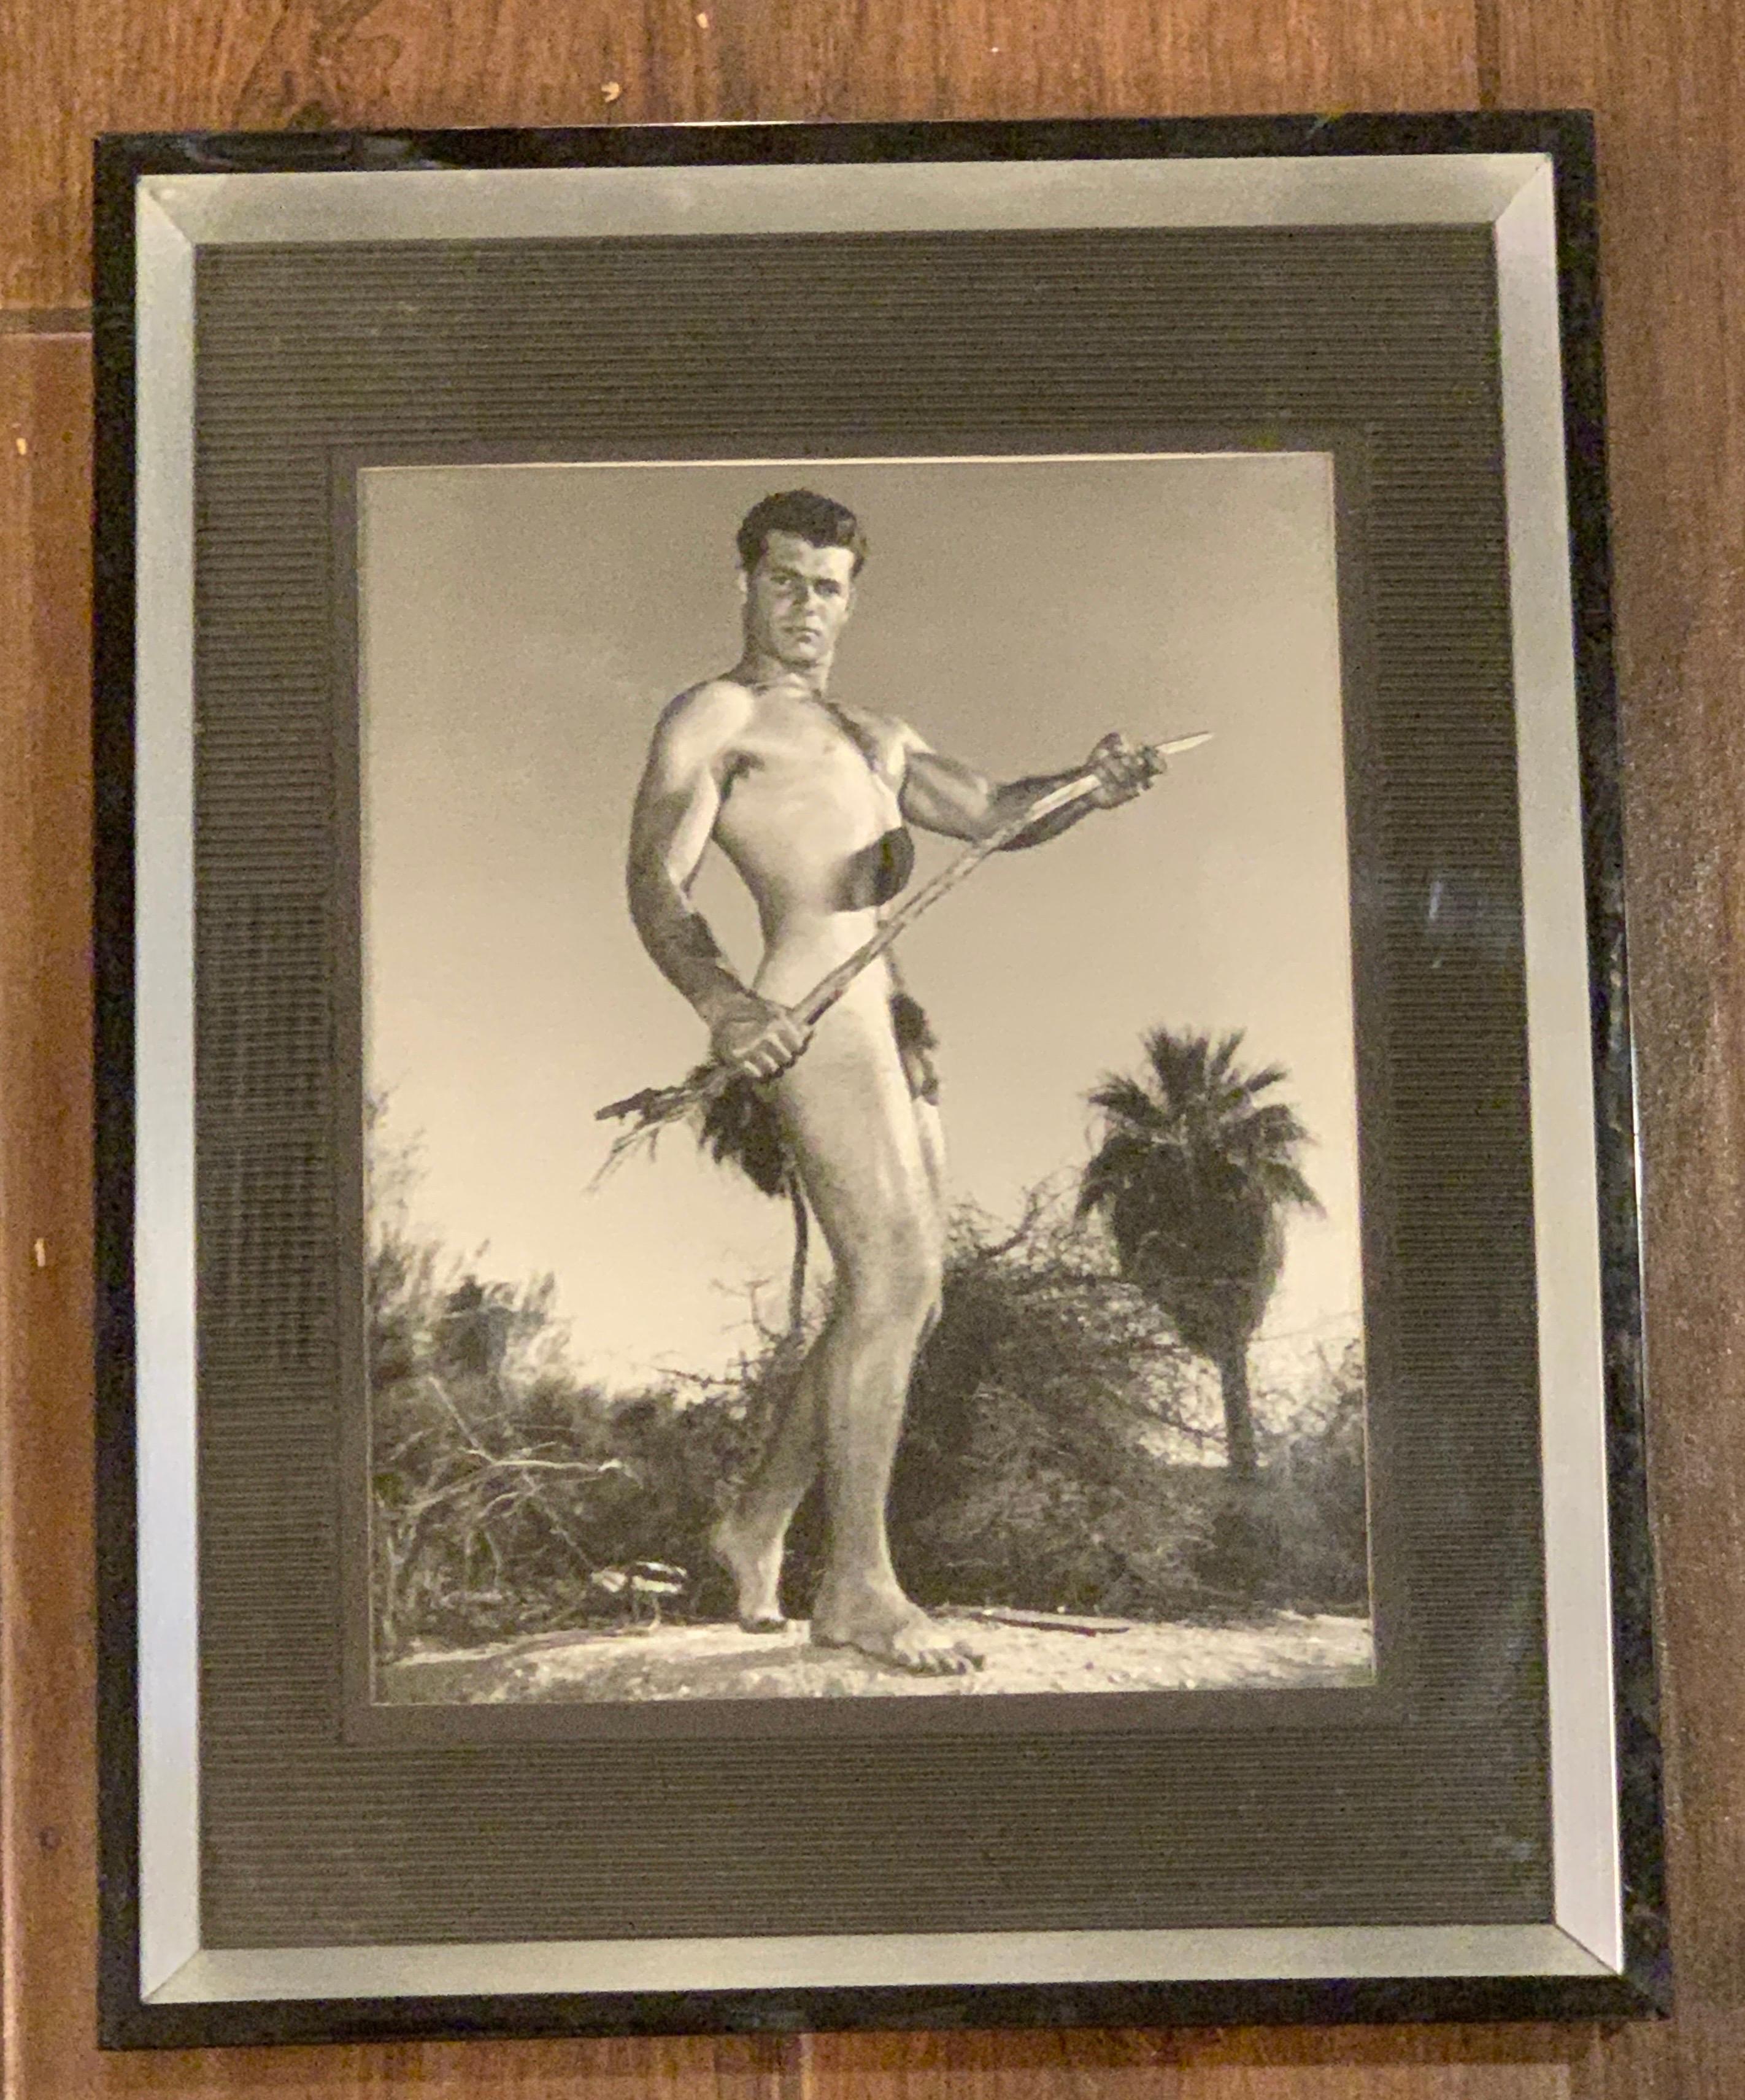 Another original 8 x 10 black-and-white photograph by world, renowned photographer, Bruce Bellas AKA Bruce of L.A. we have sold many on 1st Dibs from our personal collection of 40+ years. Please note this is not a copy. It was printed while Mr.